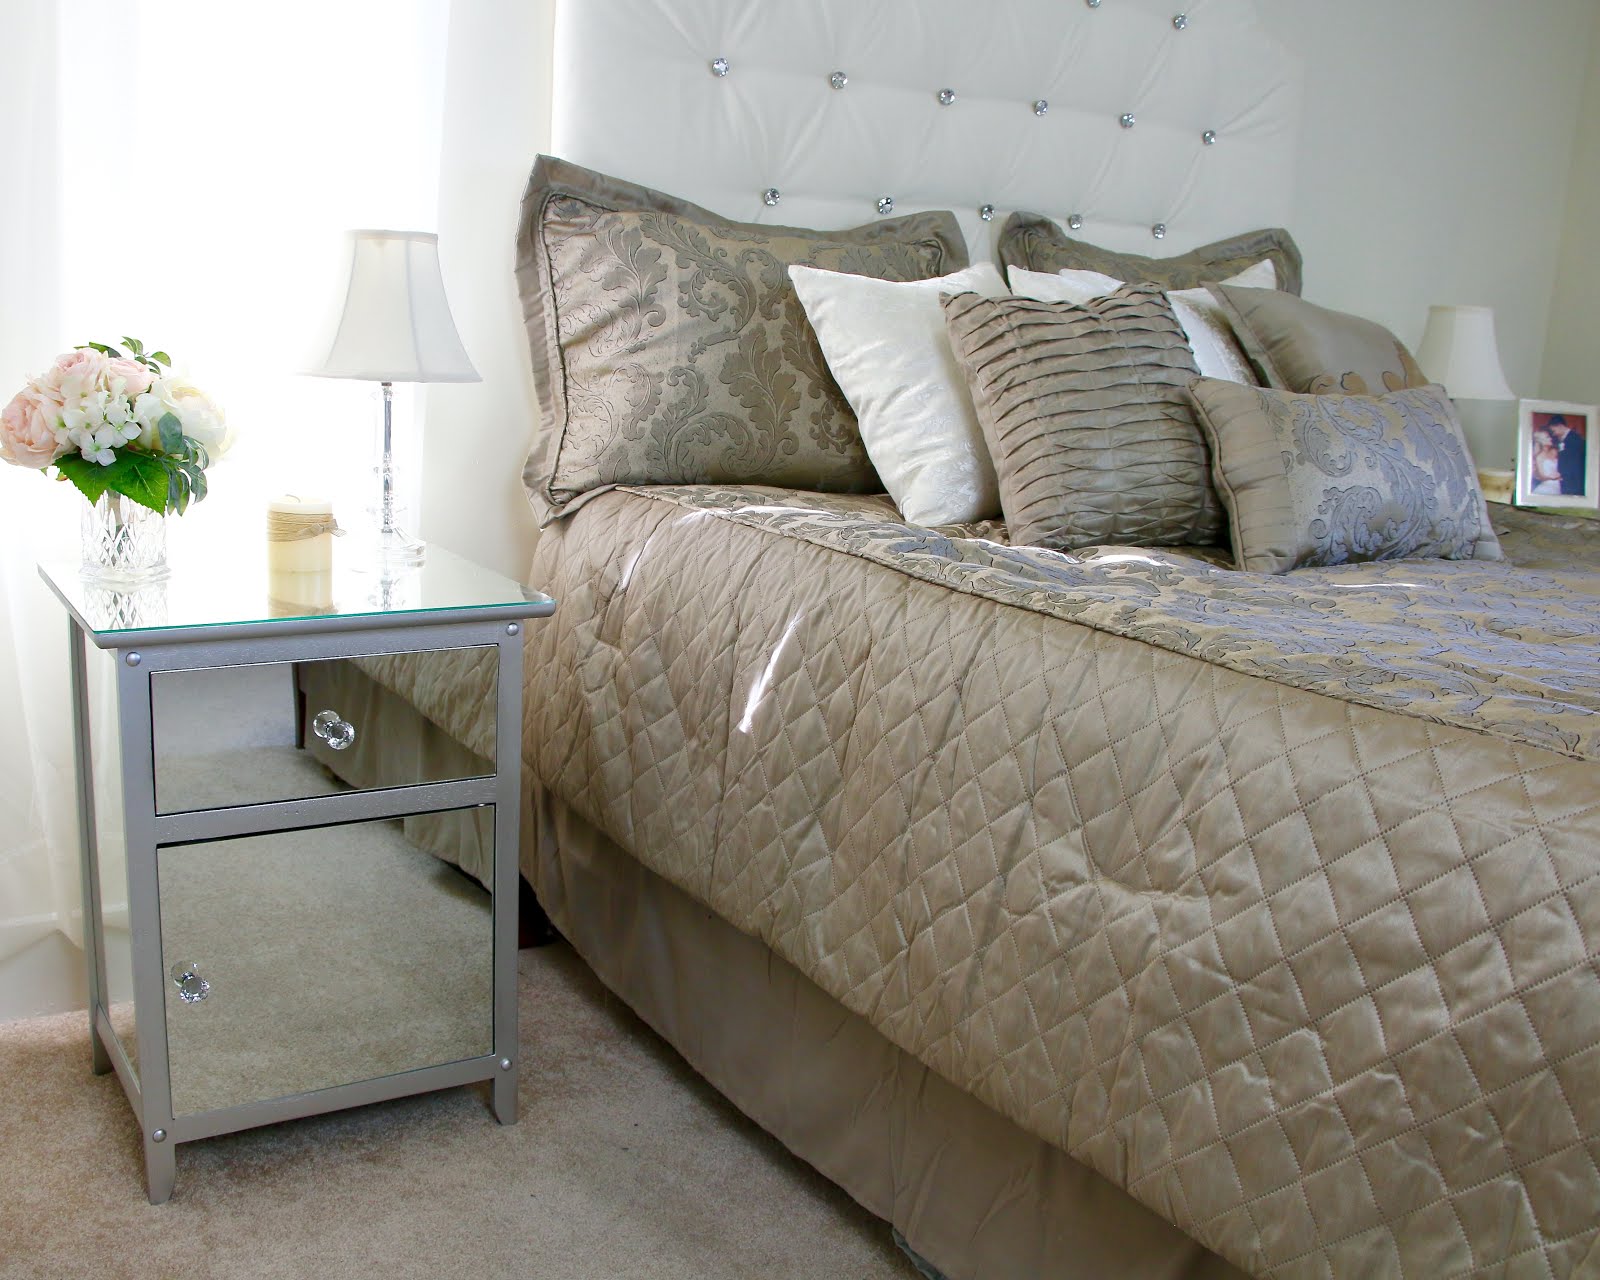 DIY Mirrored Nightstands Hack  Mirrored Furniture Makeover For